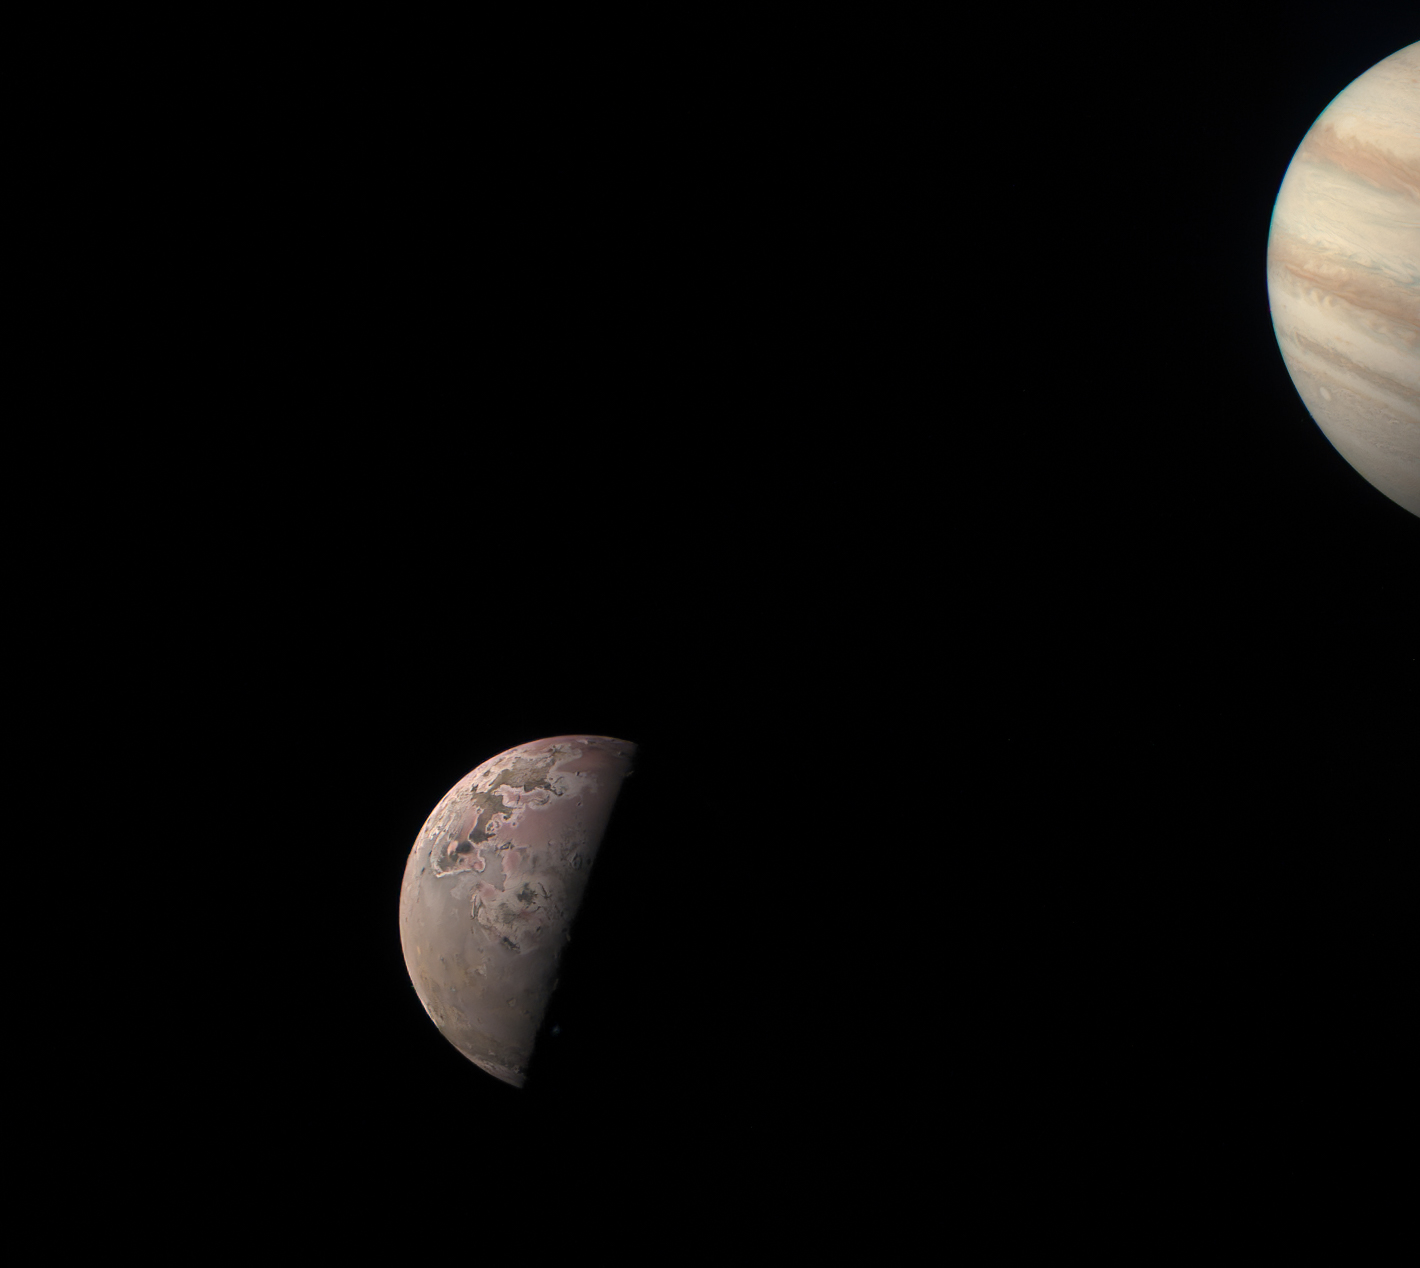 Images taken with NASA's Juno probe show Io in the bottom left and Jupiter in the top right of the image.